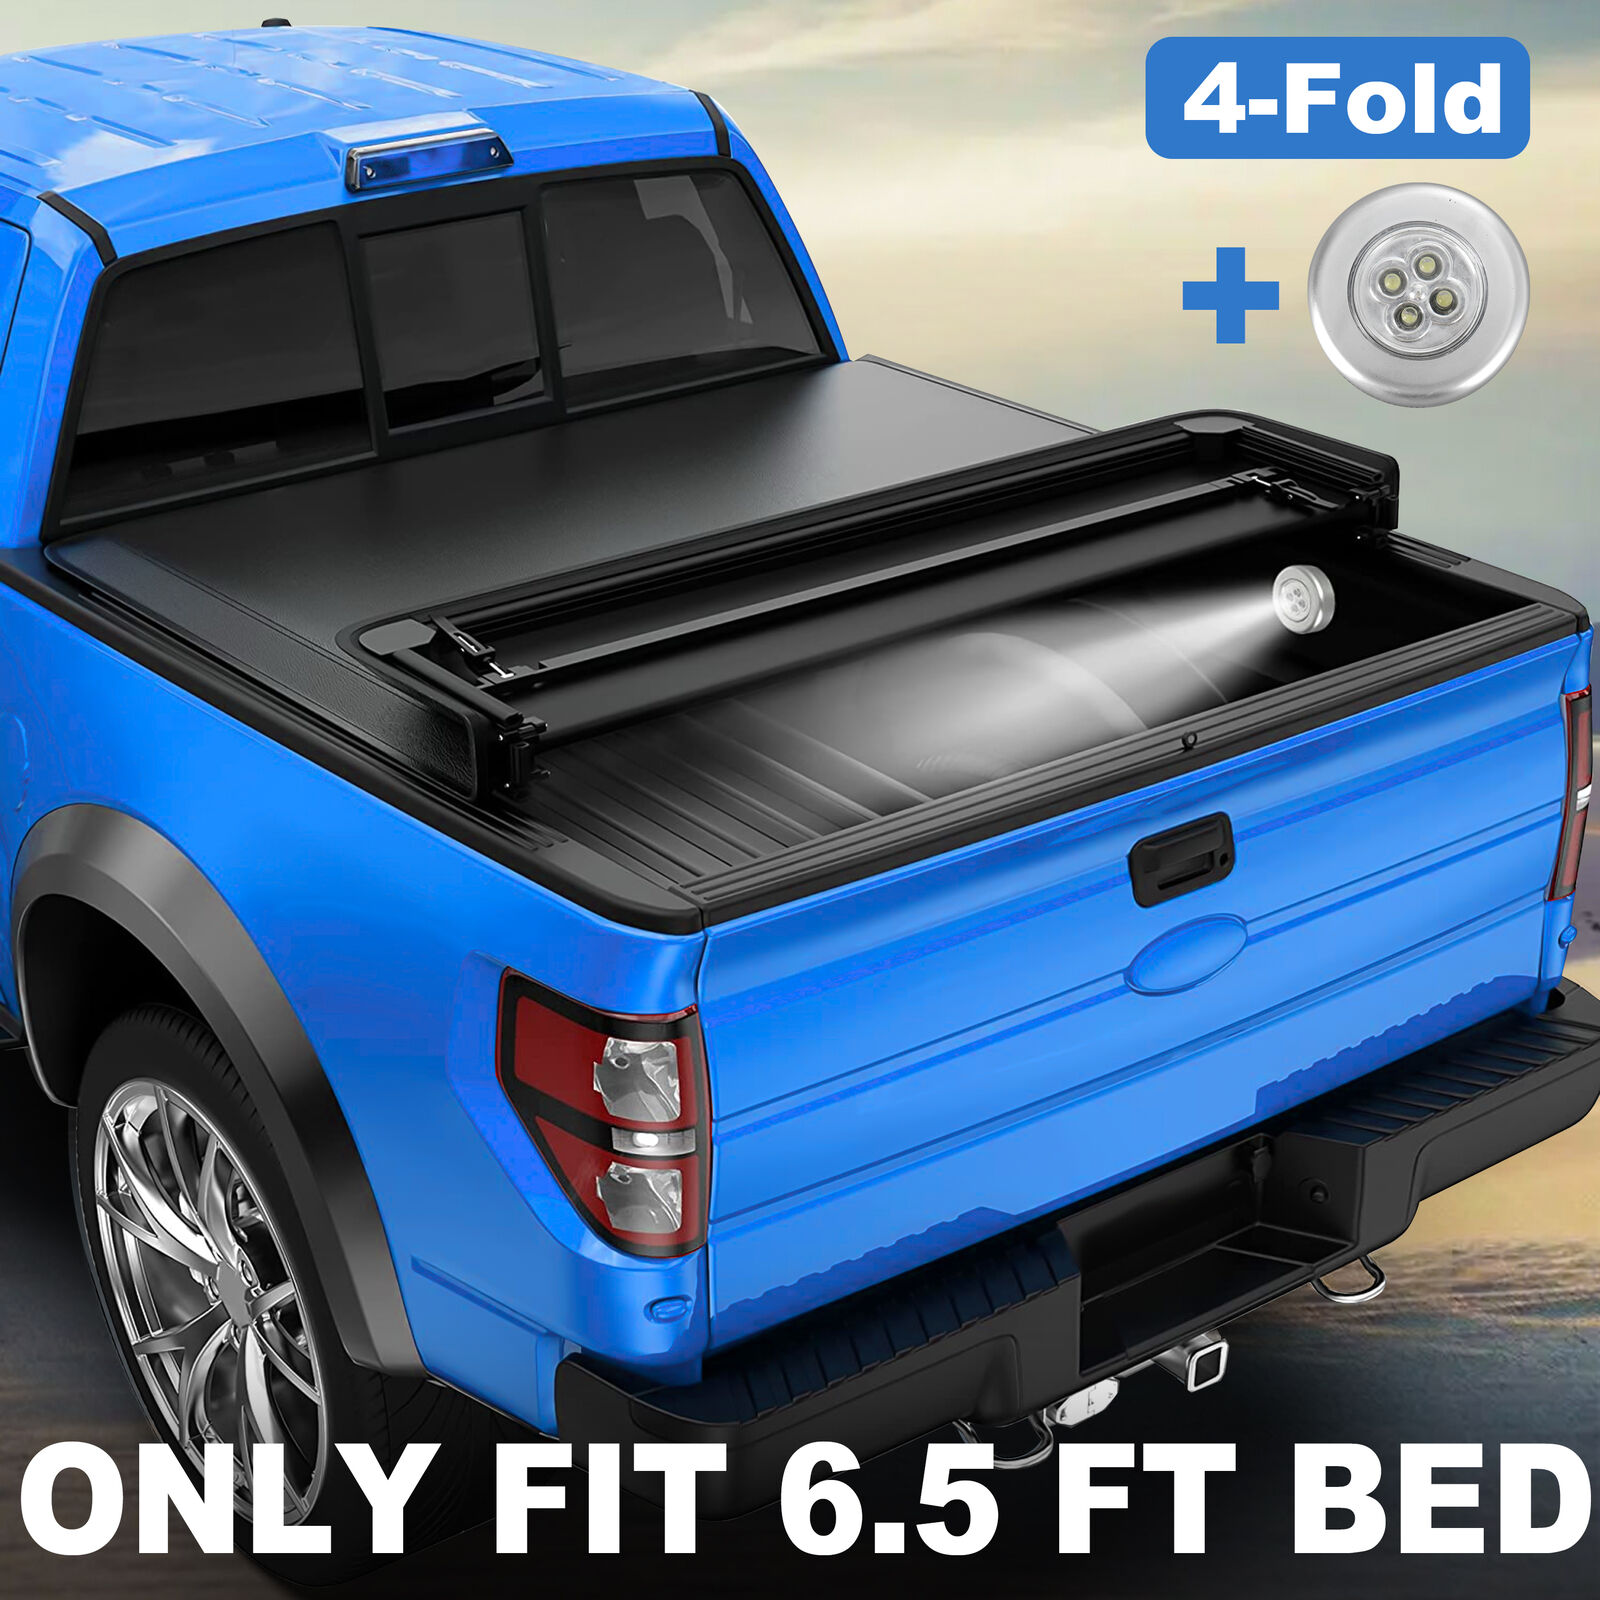 4 Fold 6.5FT Bed Truck Tonneau Cover For 15-22 Ford F150 w/ Led Lamp Waterproof